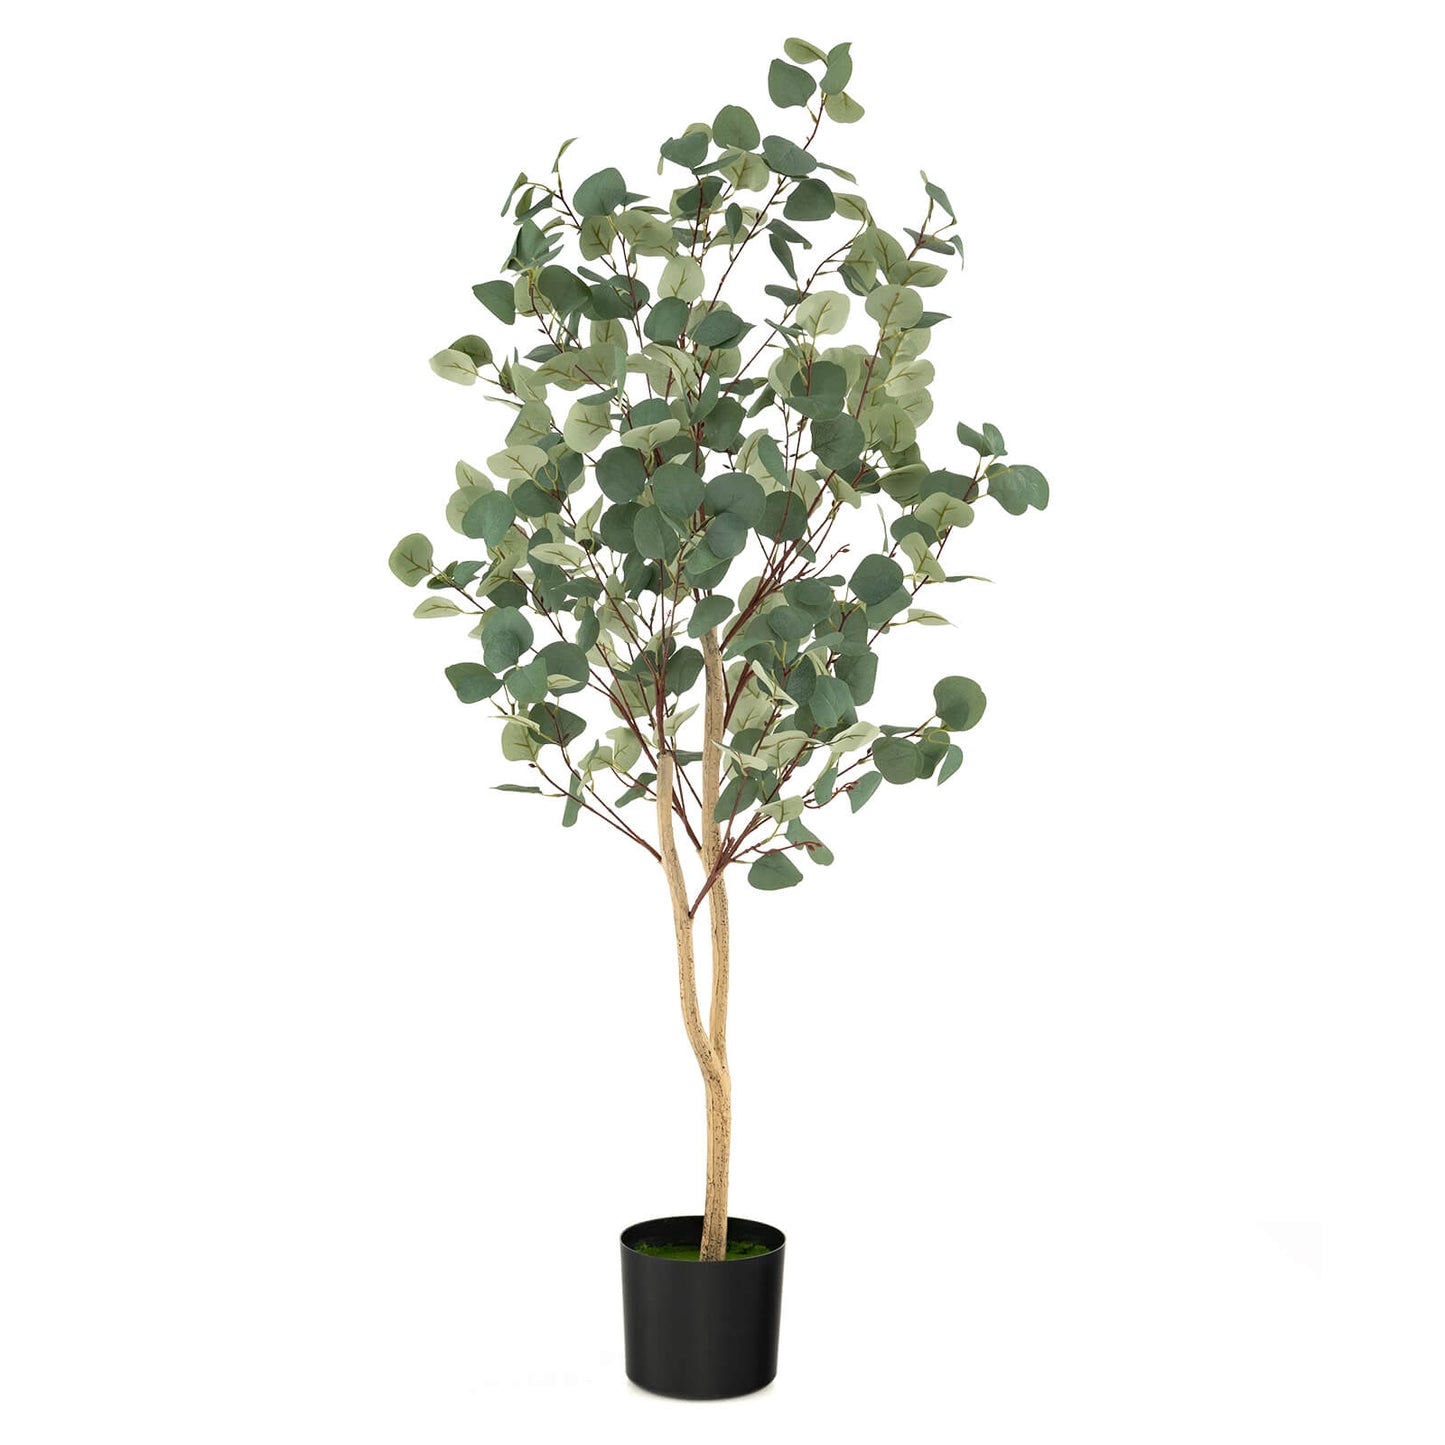 1.4/1.65 m Artificial Eucalyptus Tree with Silver Dollar Leaves-1.4 m - Furniture Gold